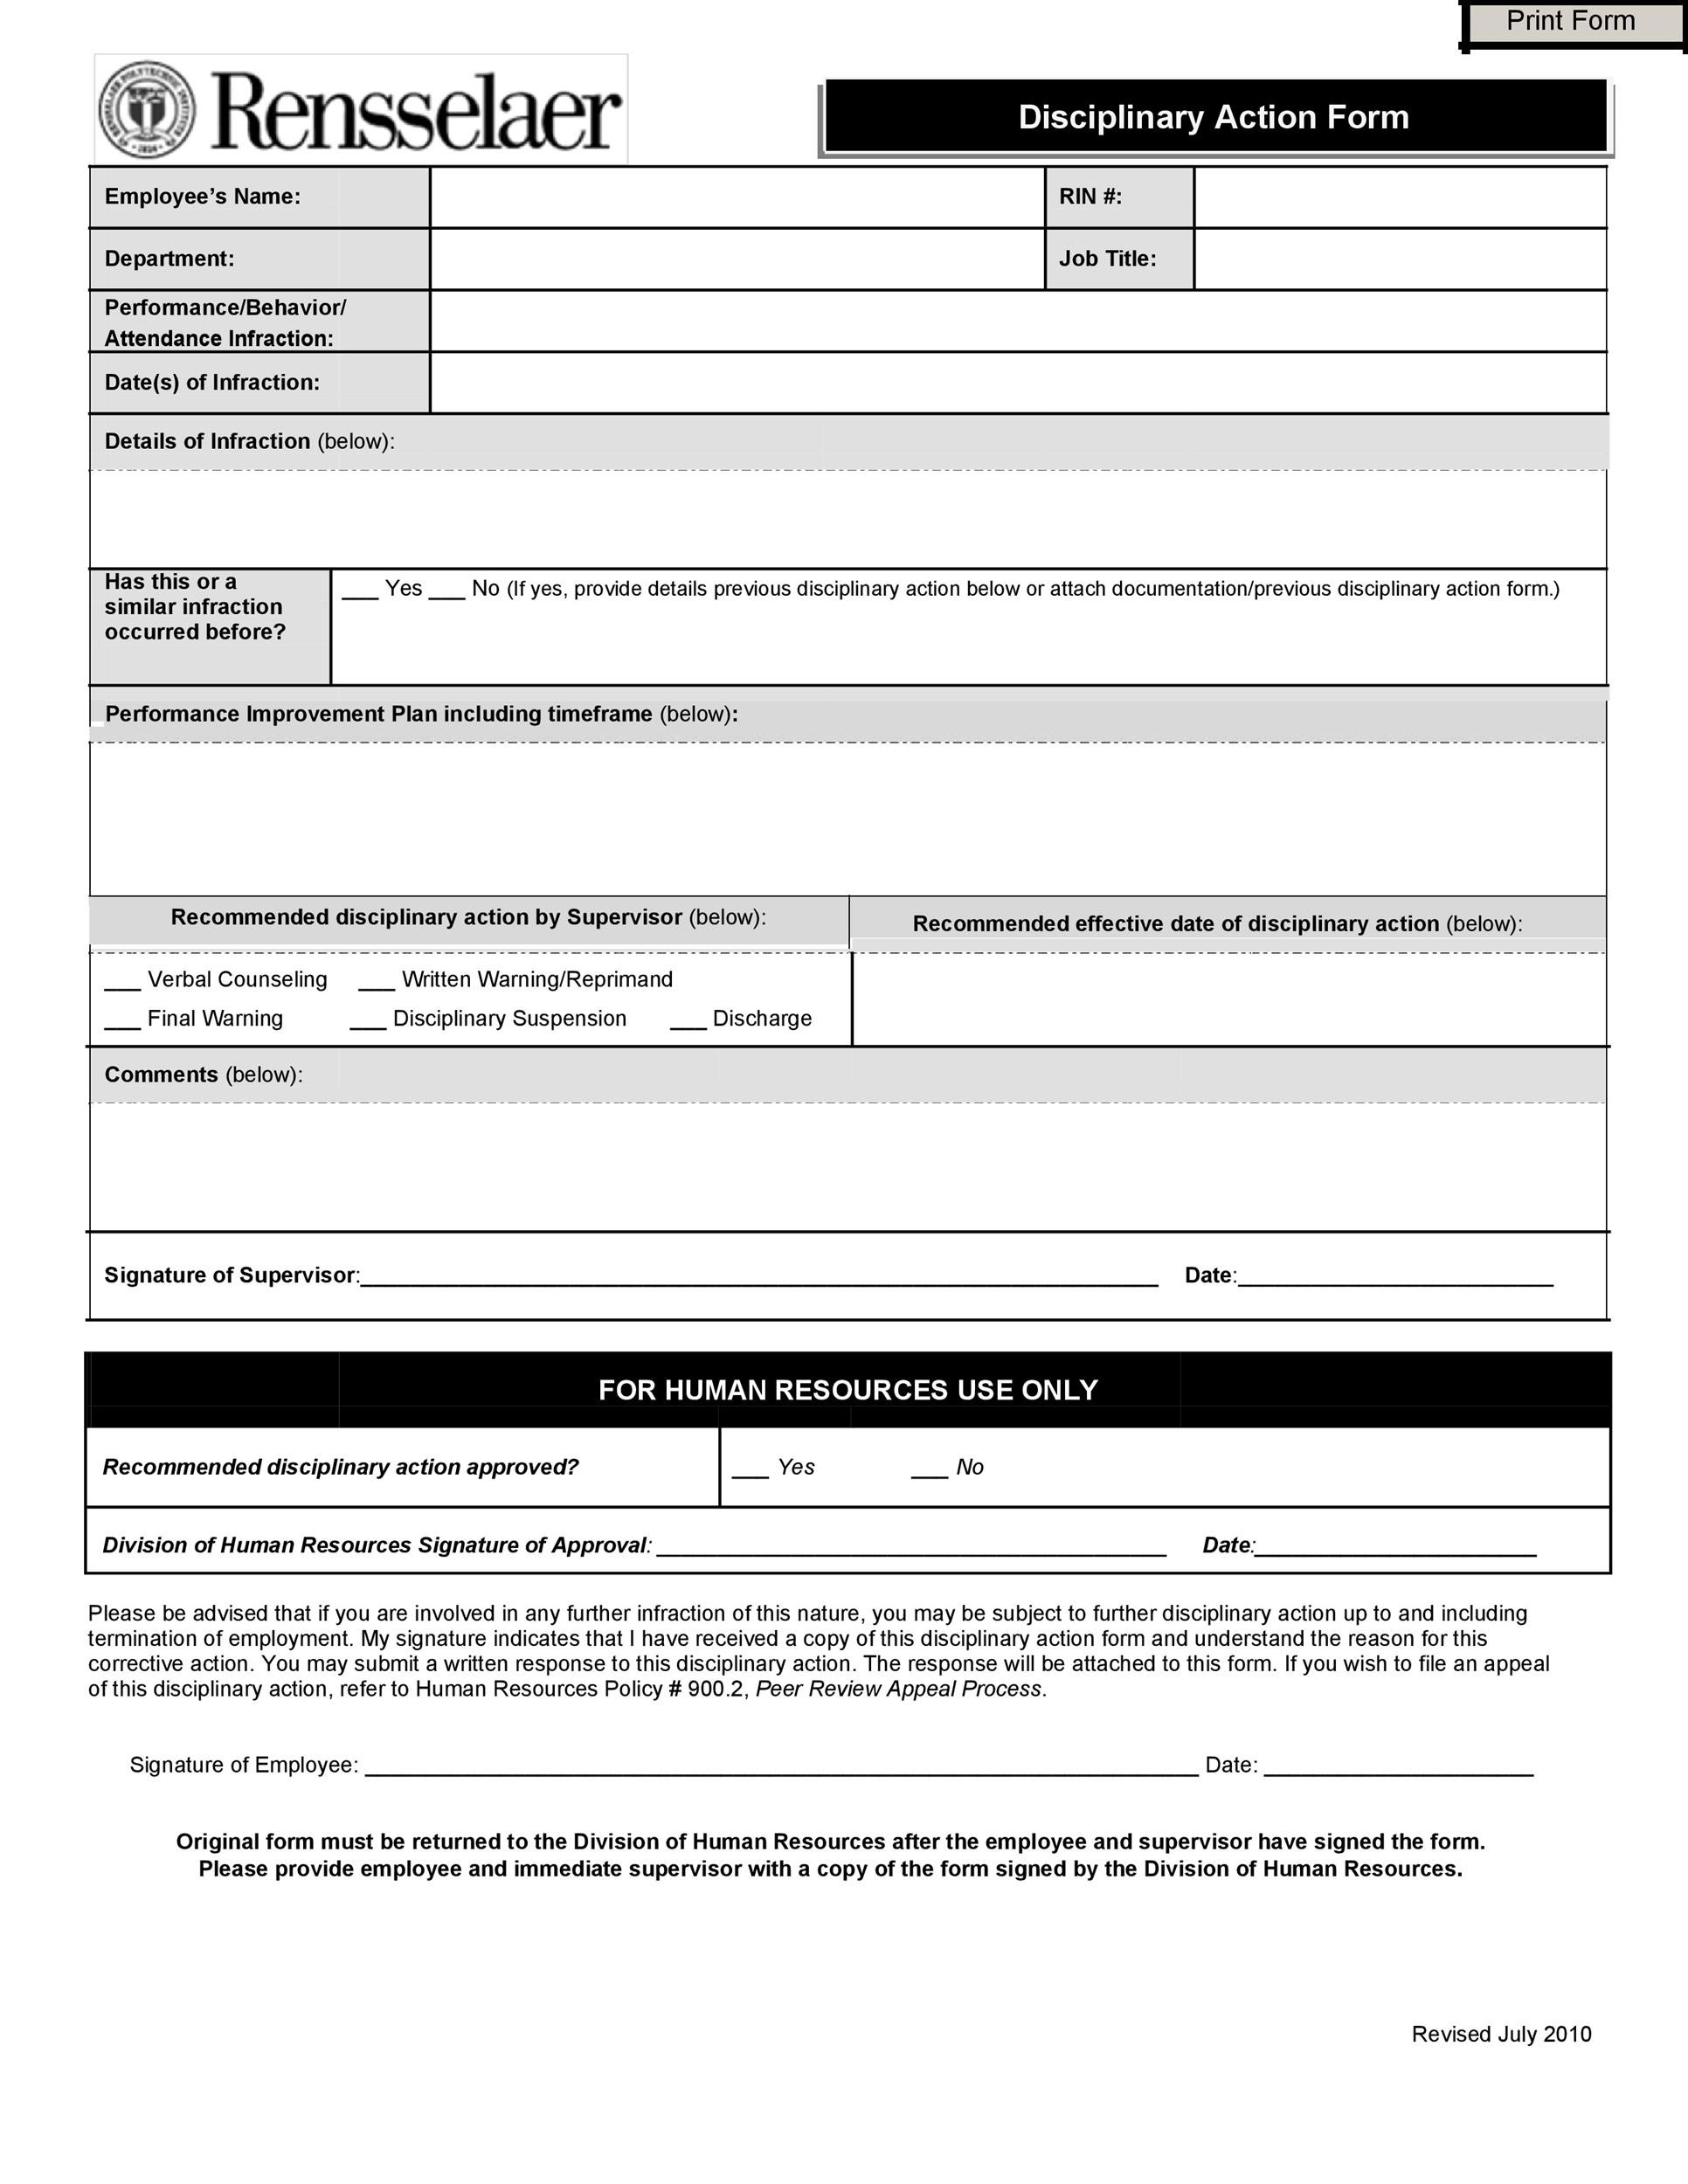 40-employee-disciplinary-action-forms-template-lab